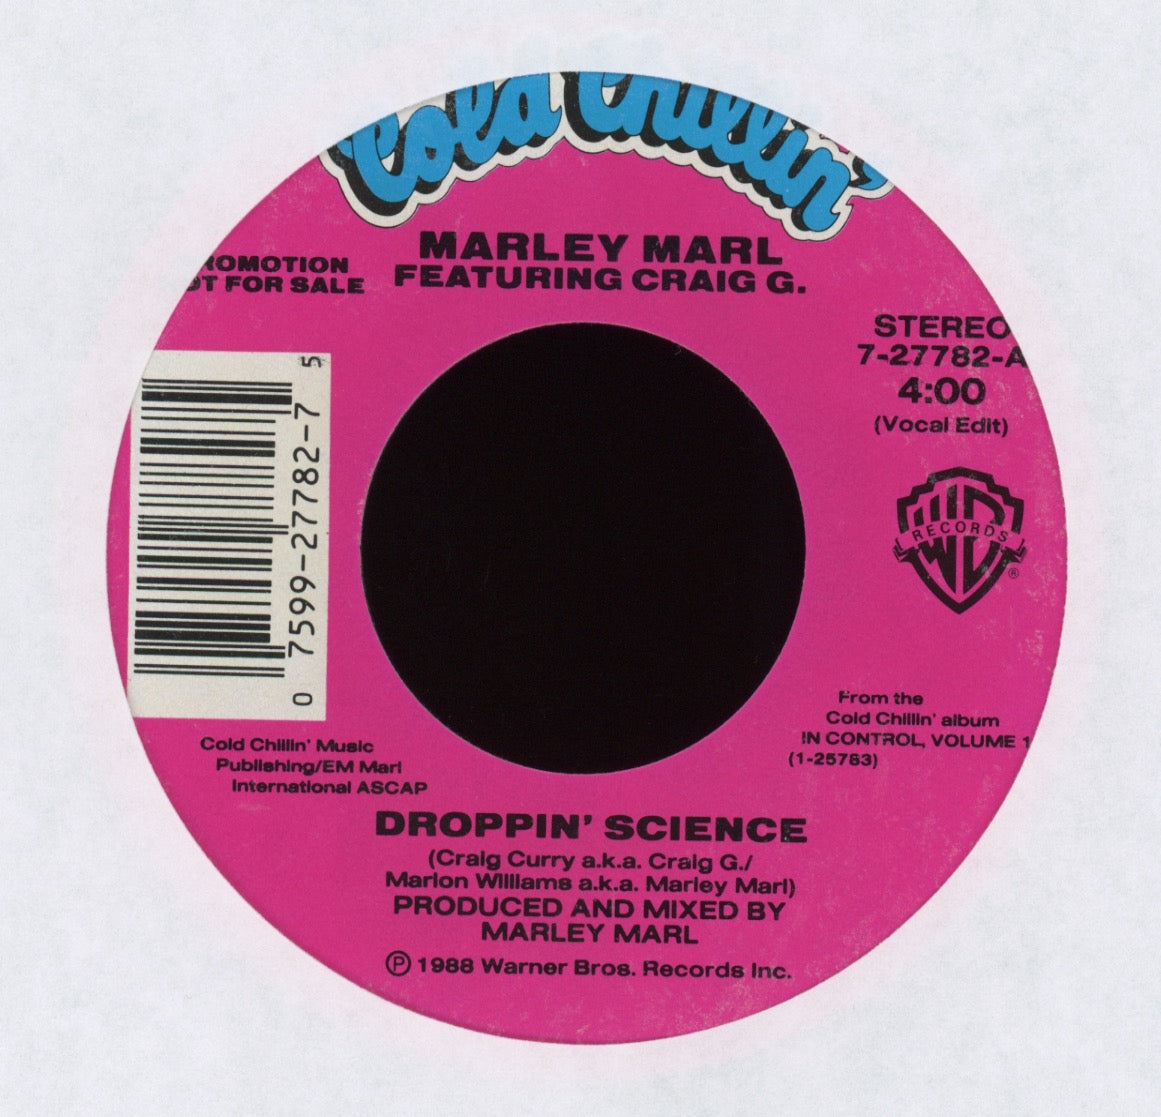 Marley Marl - Droppin' Science on Cold Chillin' Promo